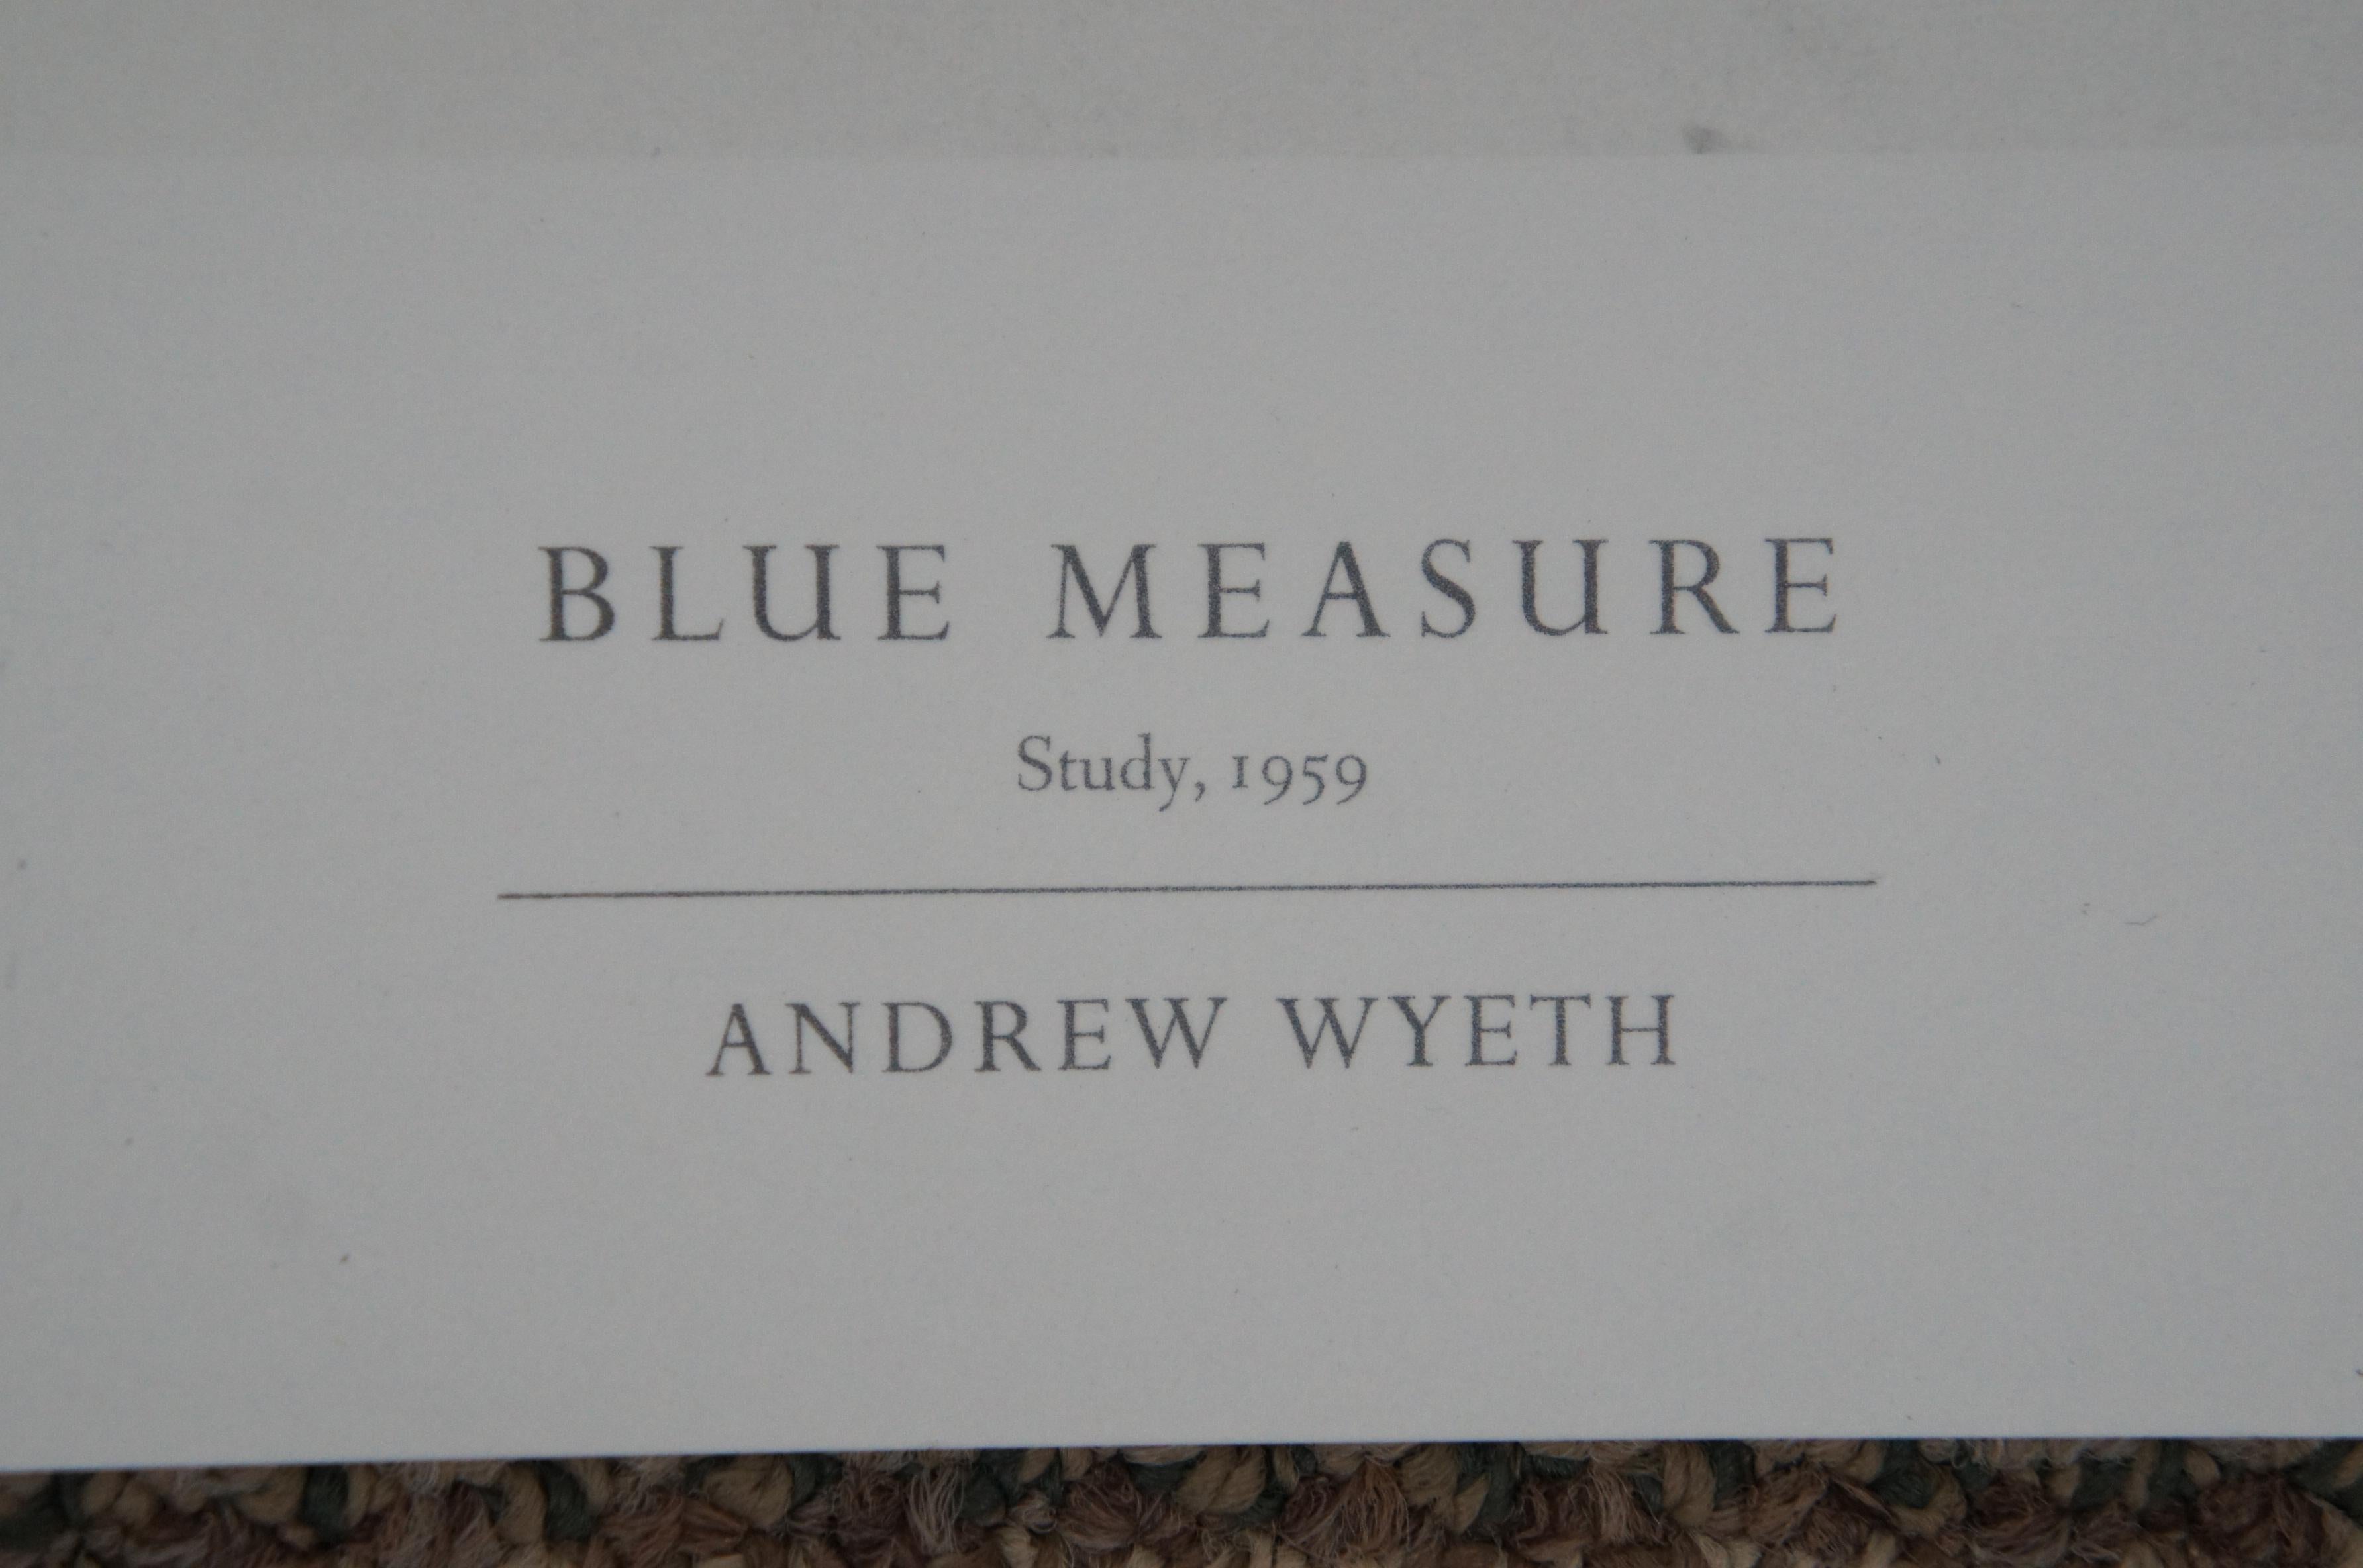 Andrew Wyeth Collotype Print Blue Measure Abstract 1976 Metropolitan Museum 1